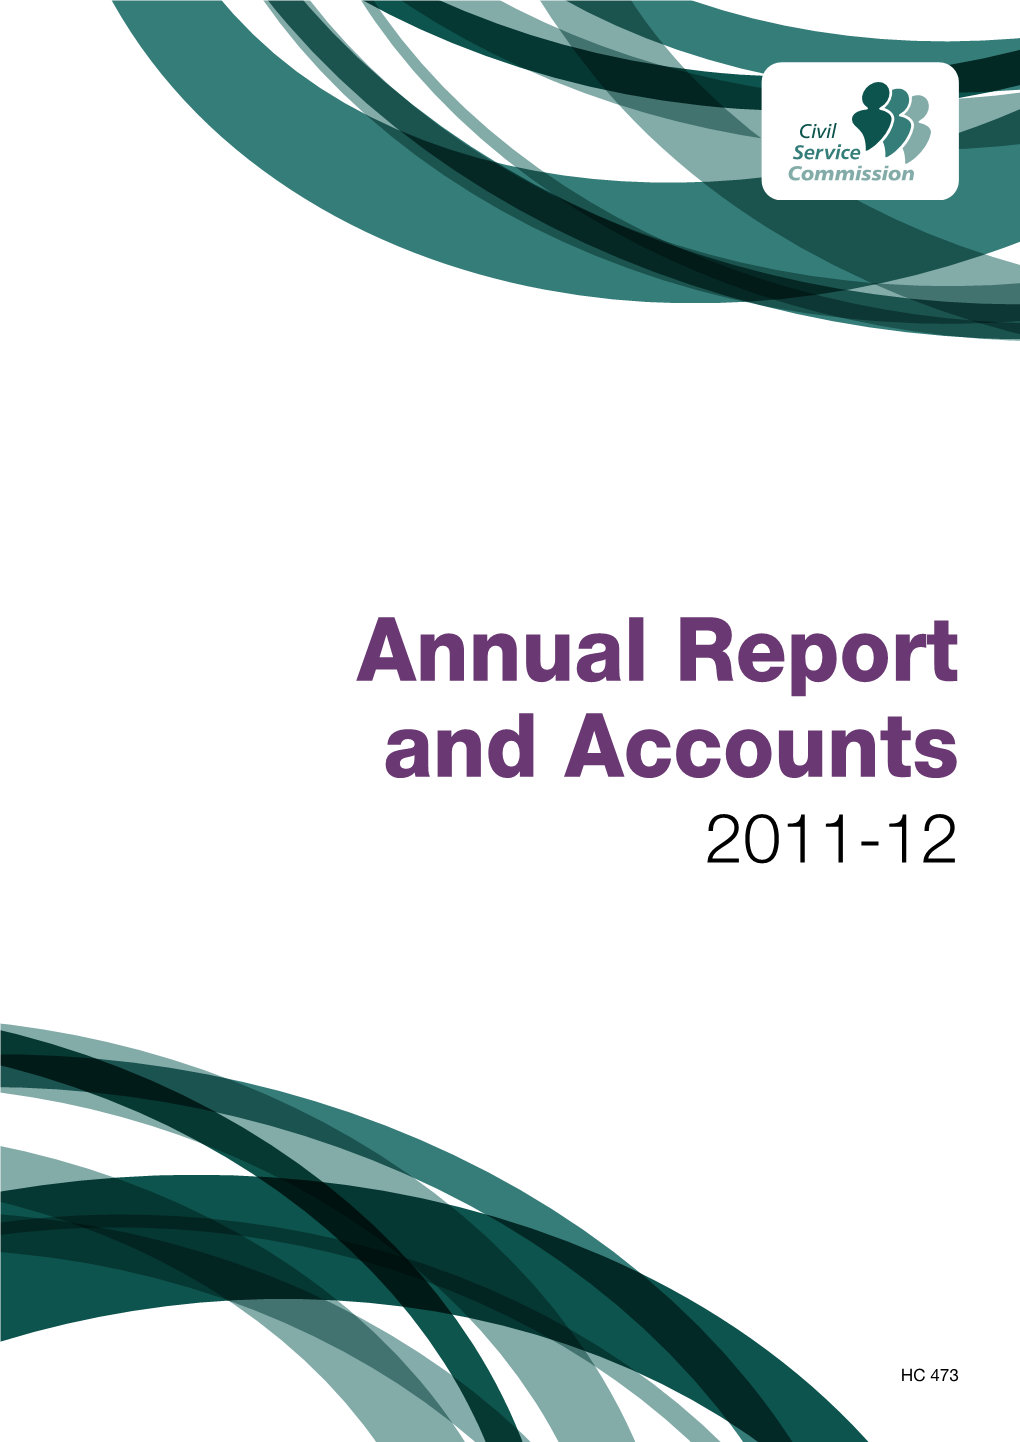 Civil Service Commission Annual Report and Accounts 2011-12, HC